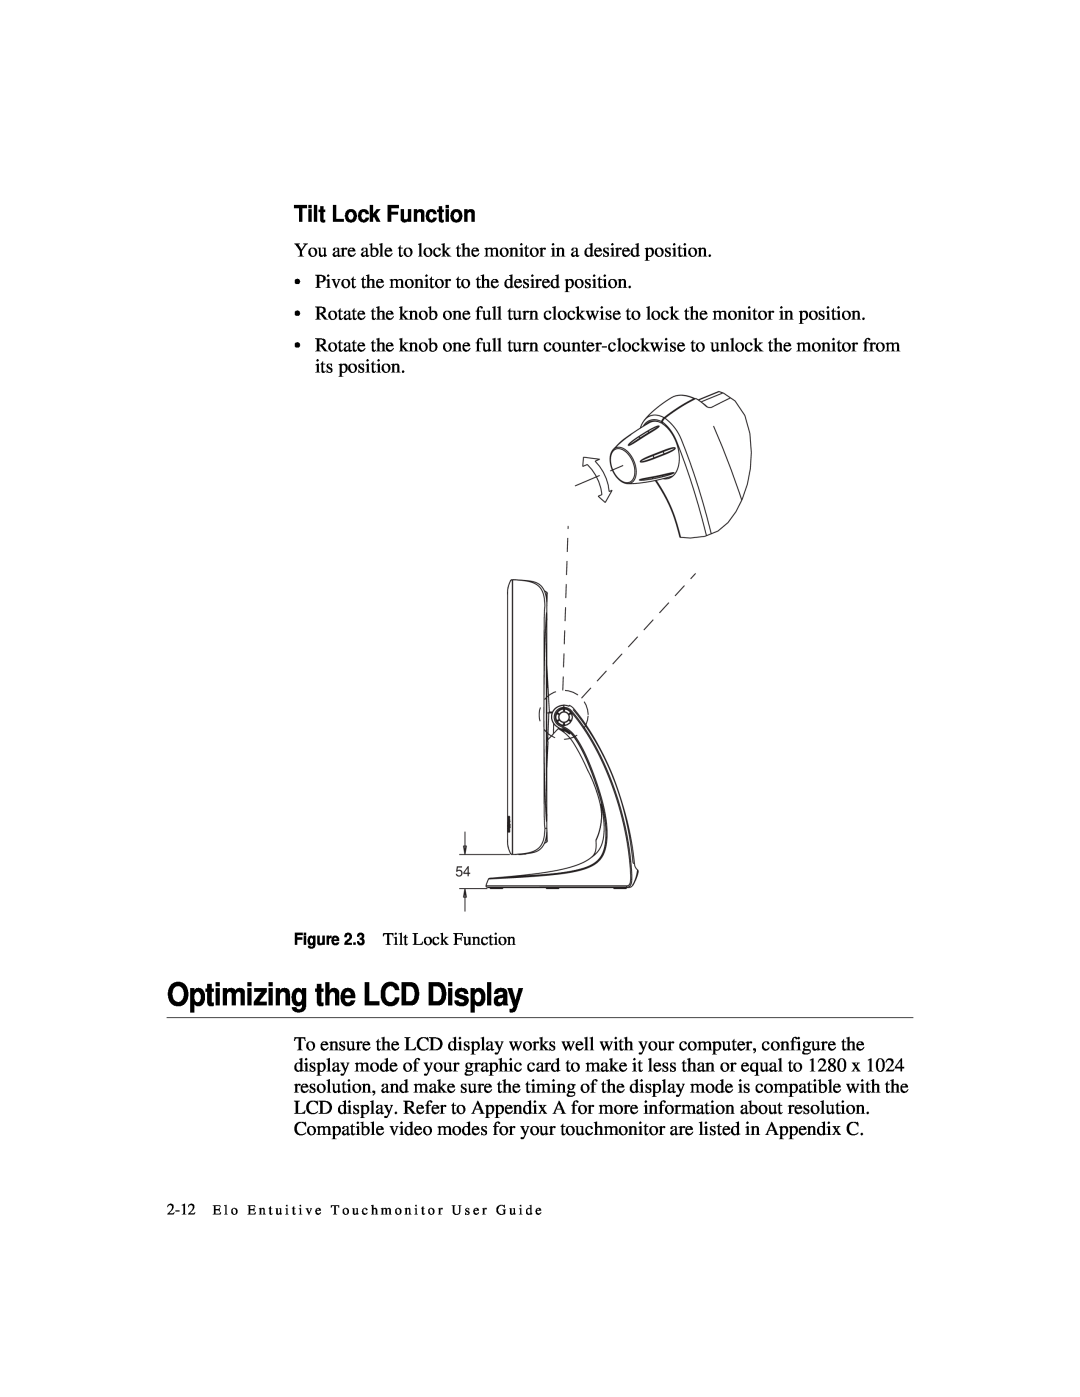 Elo TouchSystems 1925L manual Optimizing the LCD Display, Tilt Lock Function 